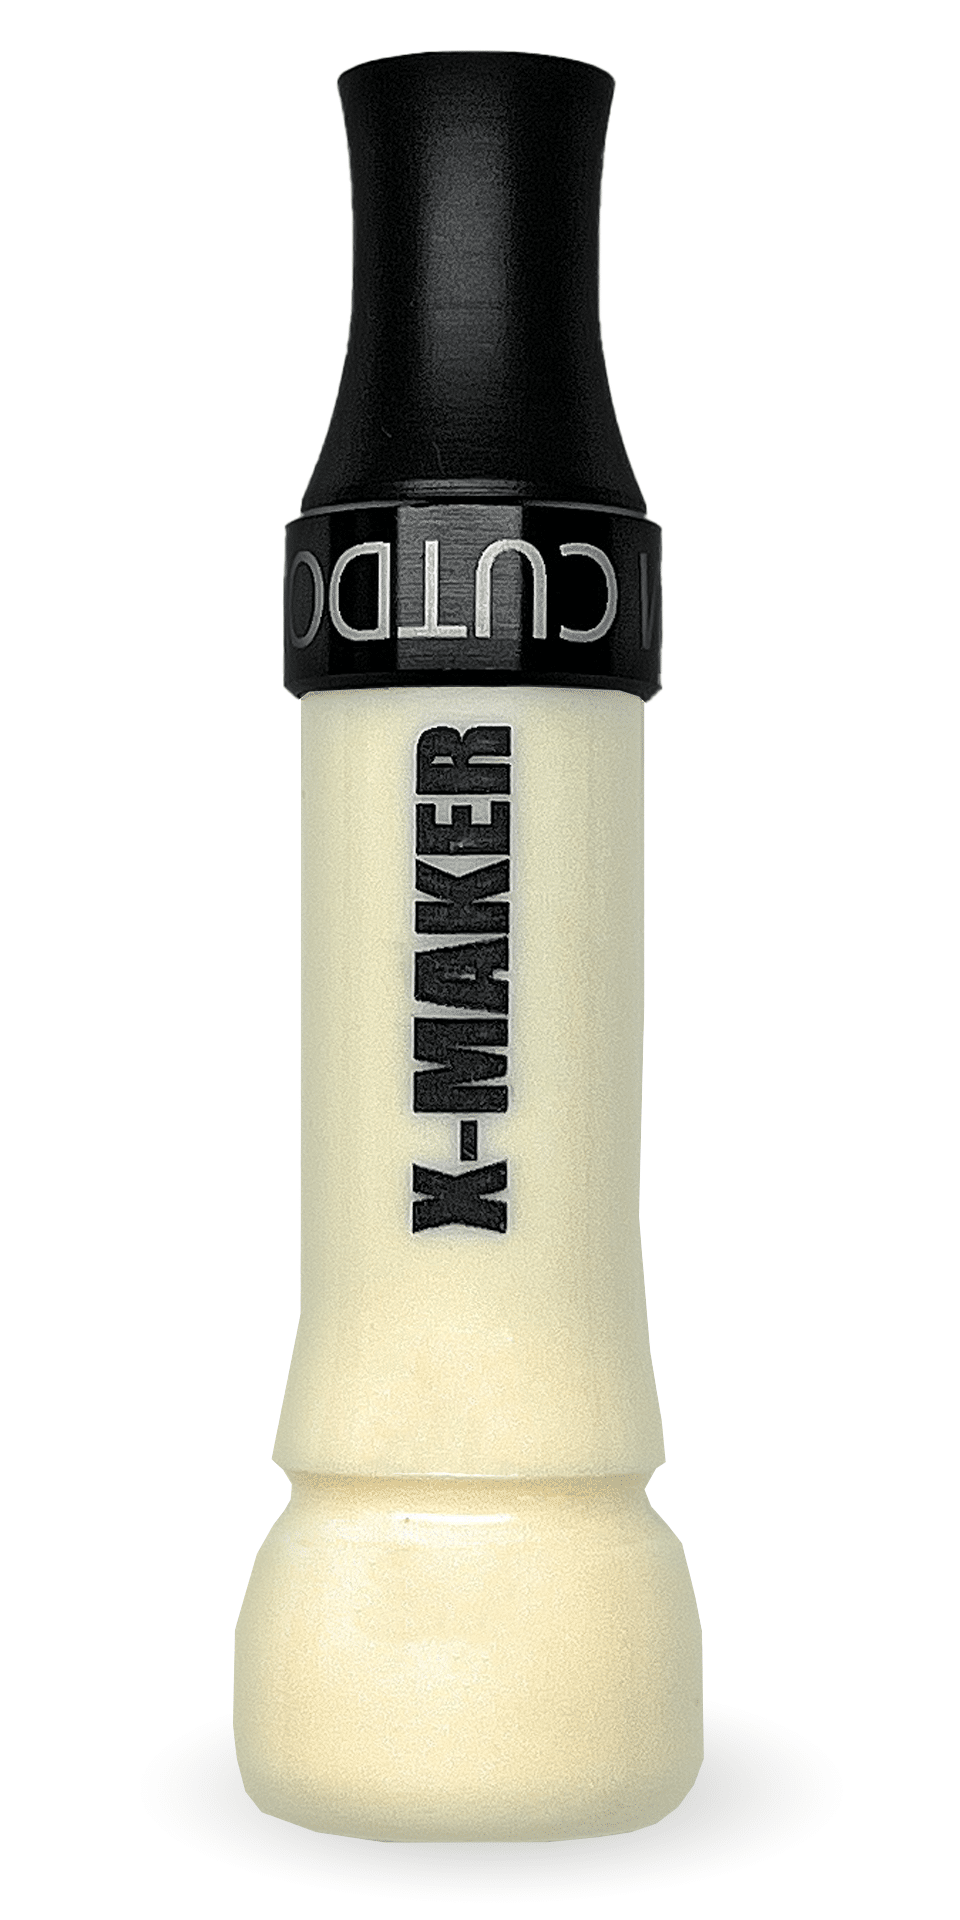 Introducing the X-MAKER Cut-Down Duck Call, now available in striking Ivory with a Black Anodized Band and a Threaded Cast Acrylic Flared Keyhole Insert. This call is designed for exceptional responsiveness, delivering excellent high and low-end tones with a loud, smooth, and user-friendly performance. Expertly crafted, cut, tuned, and sold by Kirk McCullough, these duck calls are celebrated as the best and easiest to use on the market. Proudly made in the USA on the great Mississippi flyway in Arkansas.